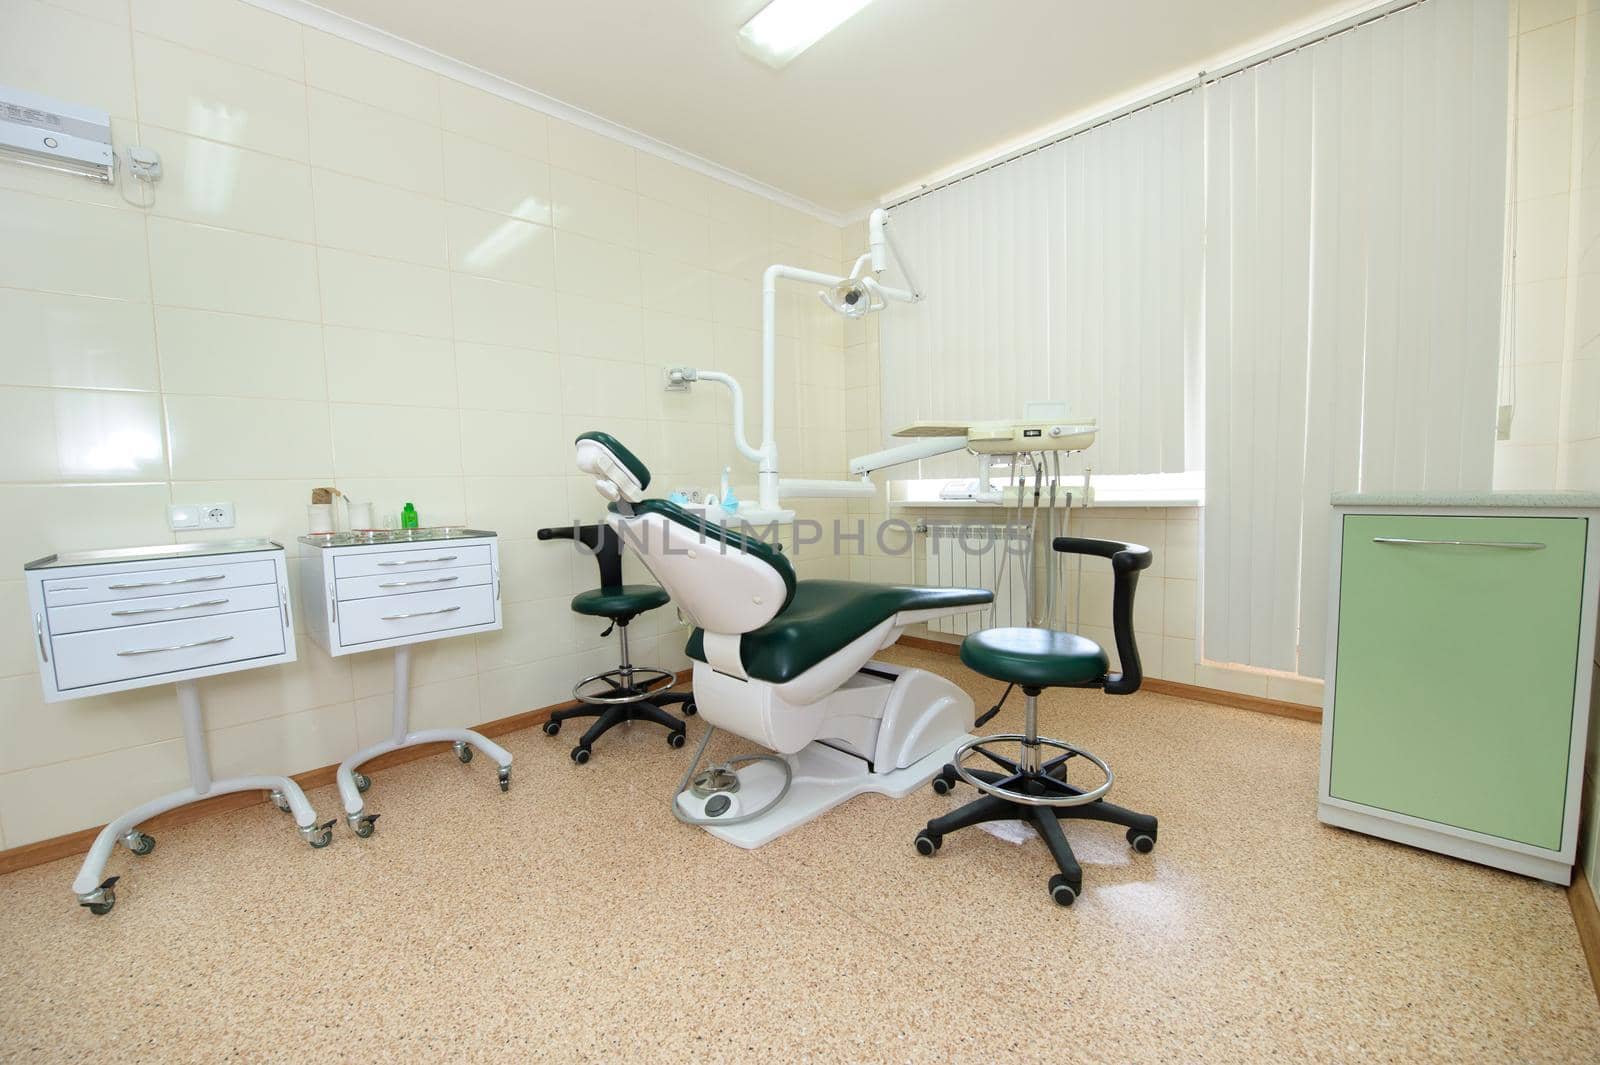 dentist's workplace in the dental office, accessories by Lobachad